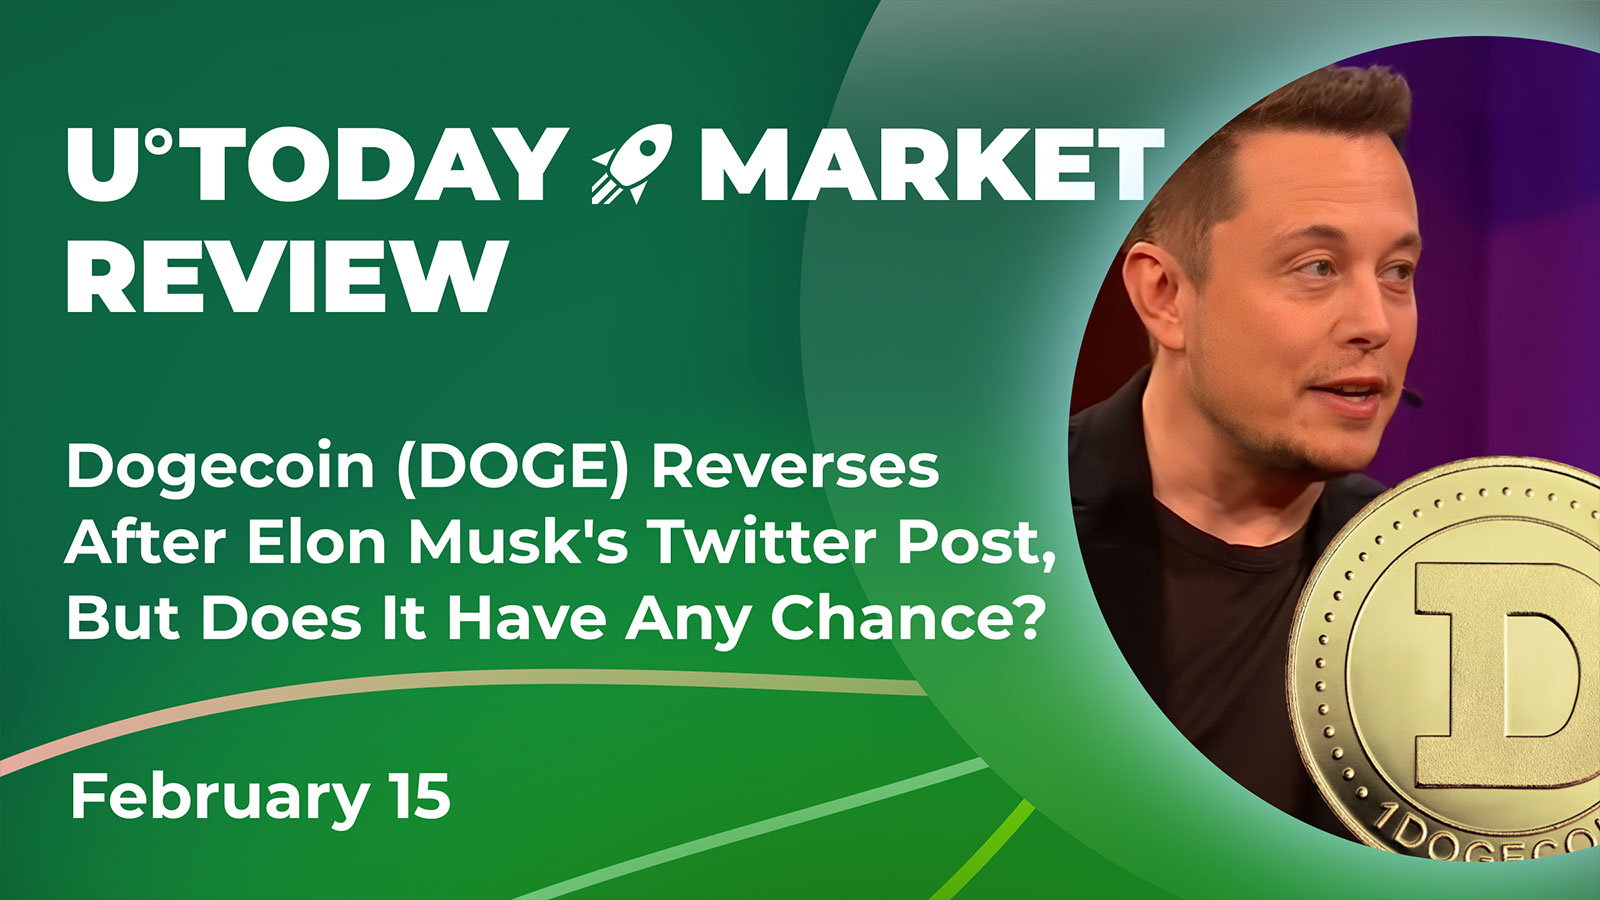 Dogecoin (DOGE) Reverses After Elon Musk’s Twitter Post, But Does It Have Any Chance?